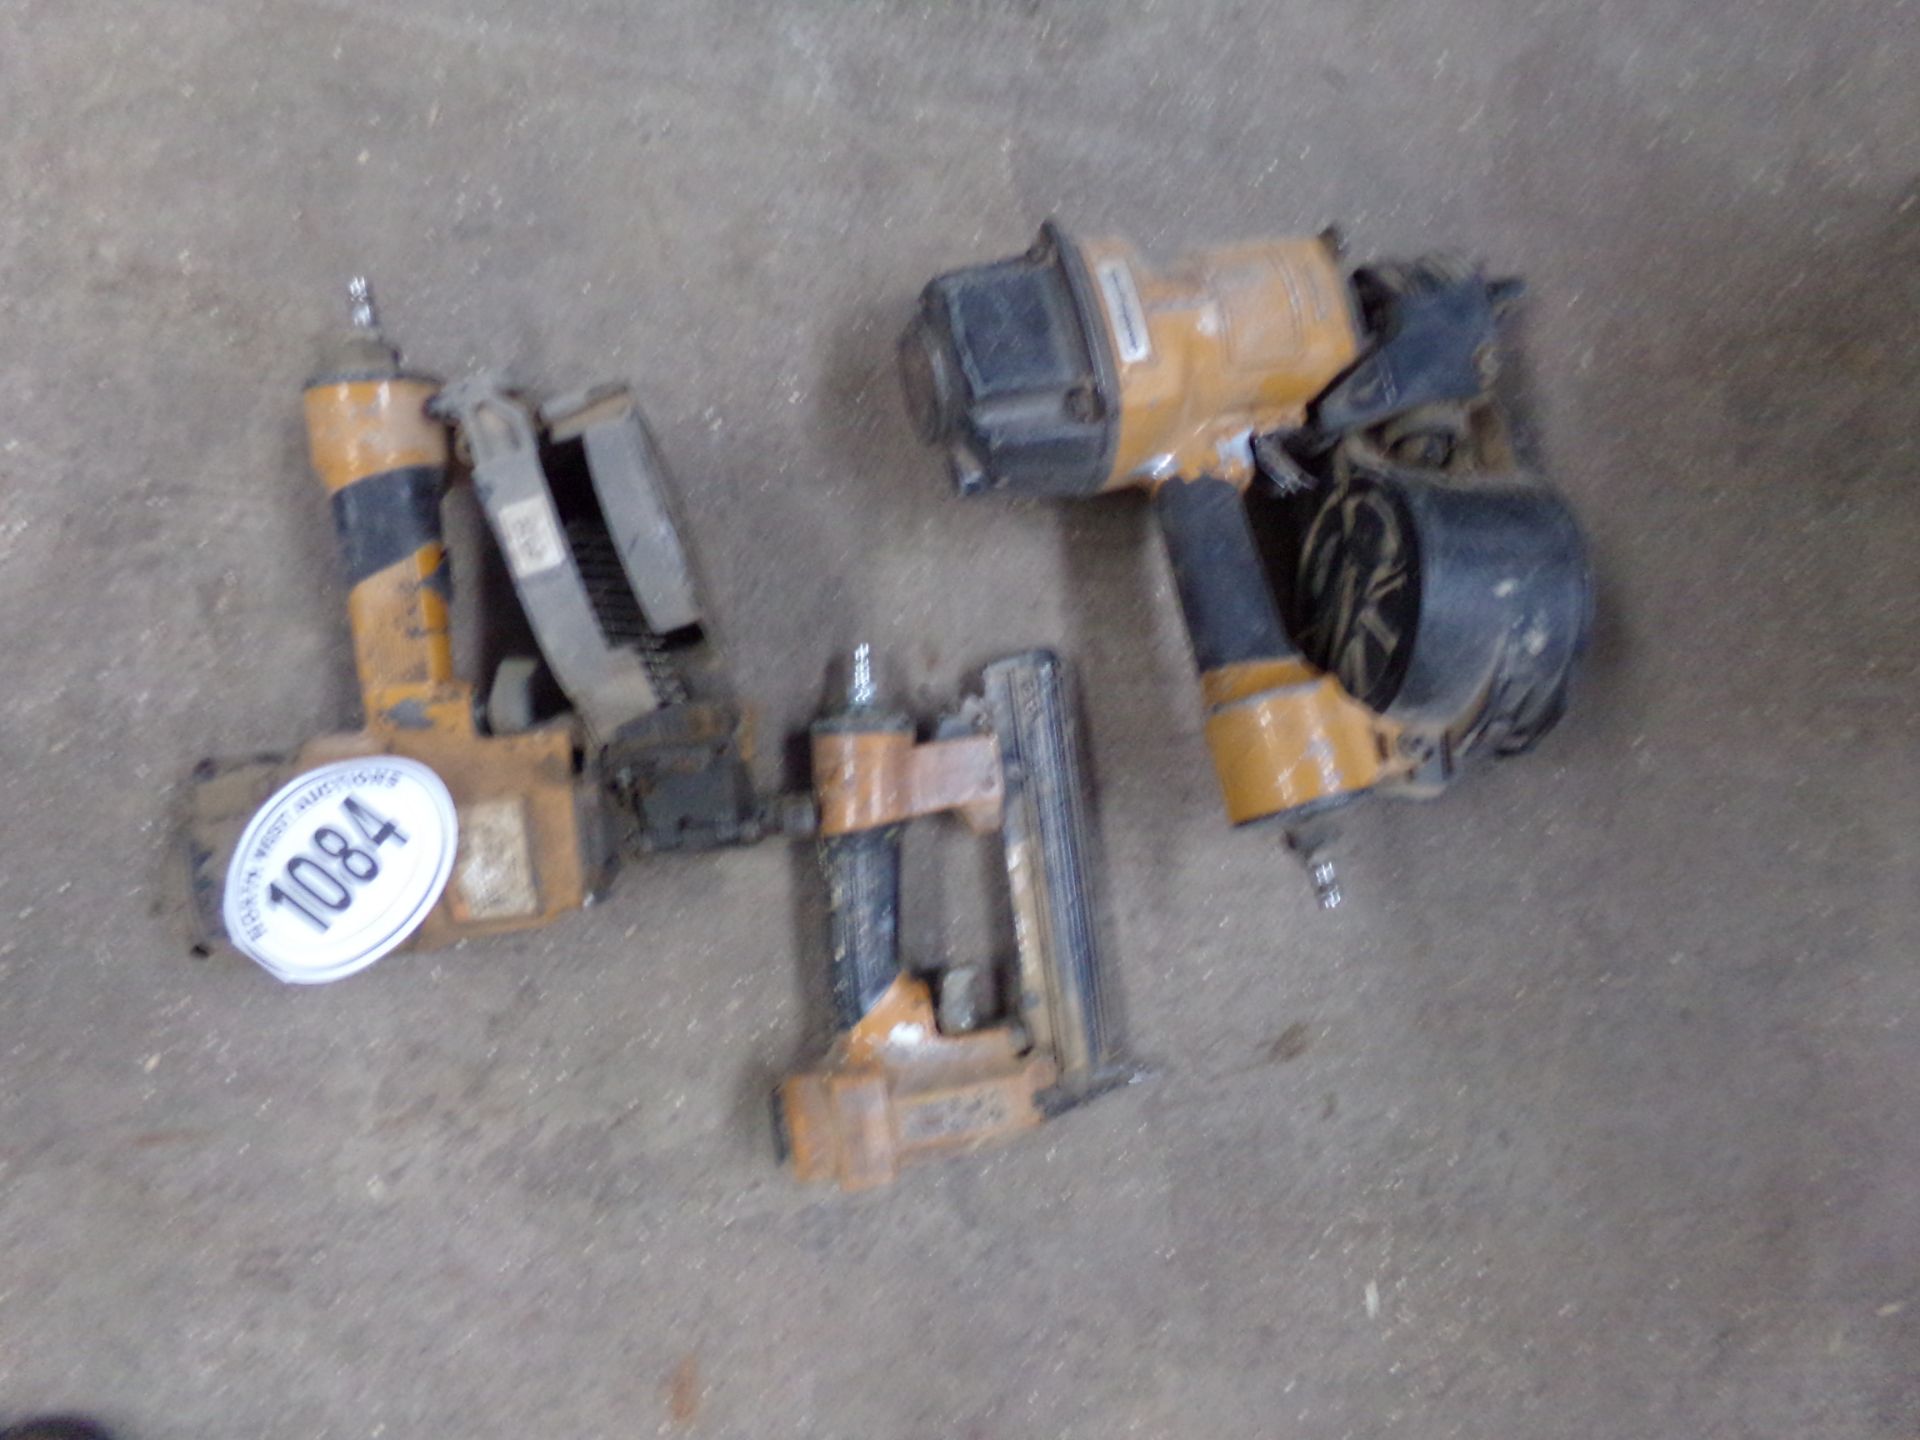 3 YELLOW STANLEY POWER TOOLS